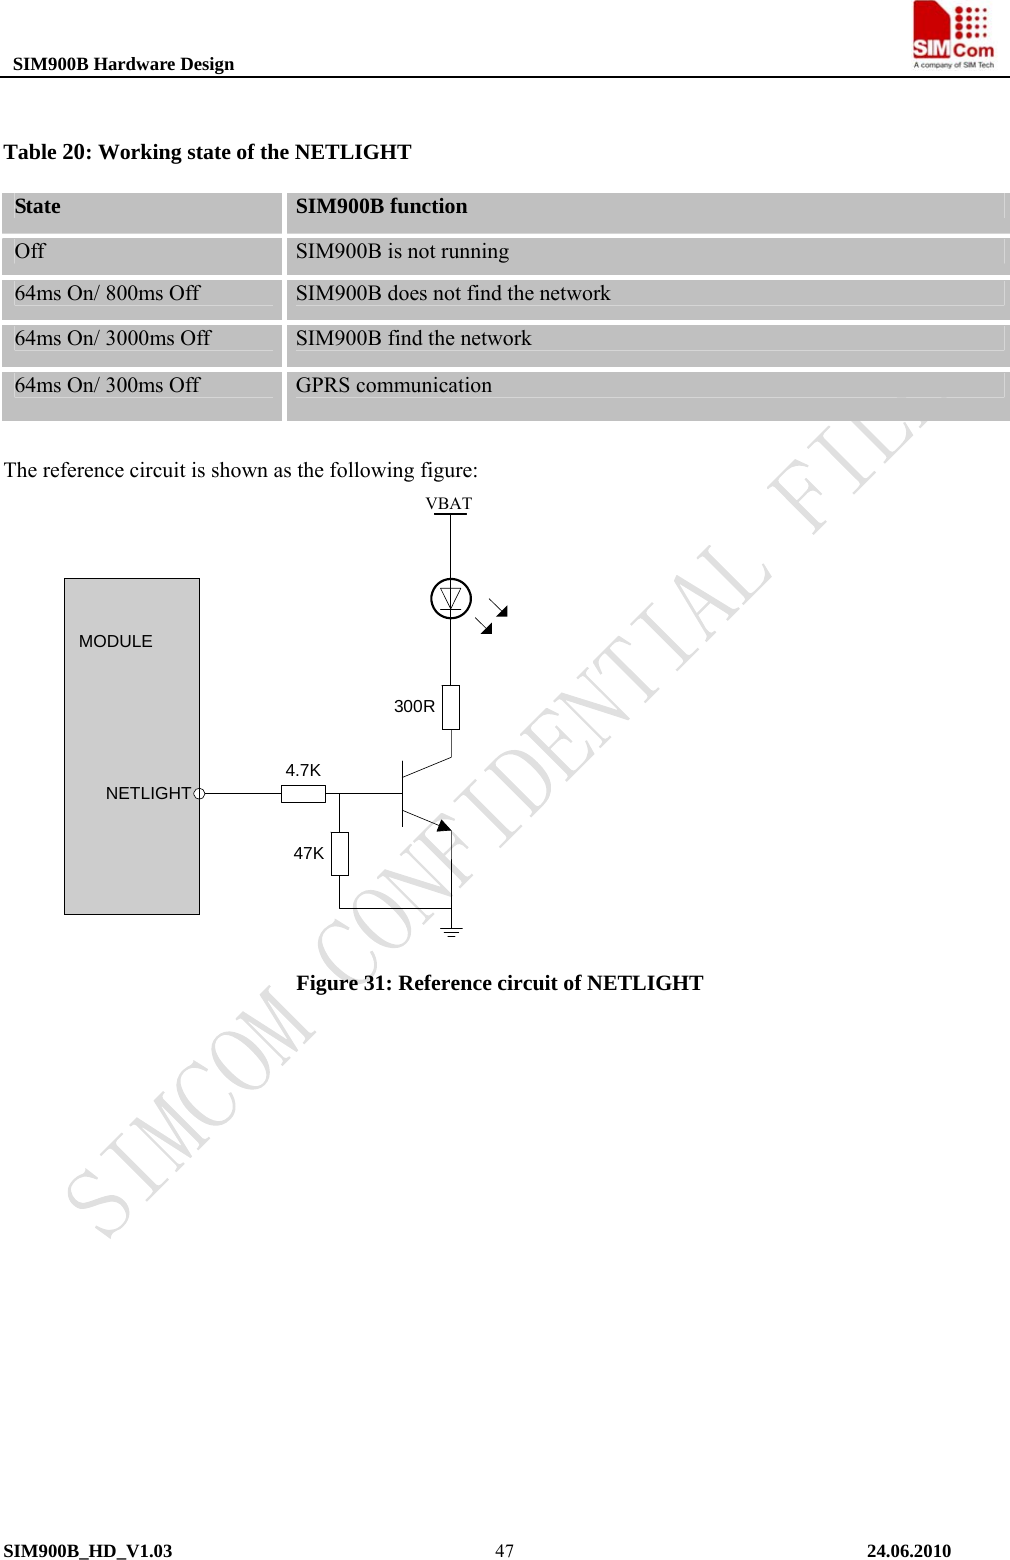  SIM900B Hardware Design                                                                           Table 20: Working state of the NETLIGHT State  SIM900B function Off  SIM900B is not running 64ms On/ 800ms Off  SIM900B does not find the network 64ms On/ 3000ms Off  SIM900B find the network 64ms On/ 300ms Off  GPRS communication   The reference circuit is shown as the following figure:   300R4.7K47KMODULENETLIGHTVBAT Figure 31: Reference circuit of NETLIGHT            SIM900B_HD_V1.03                                                                          24.06.2010  47